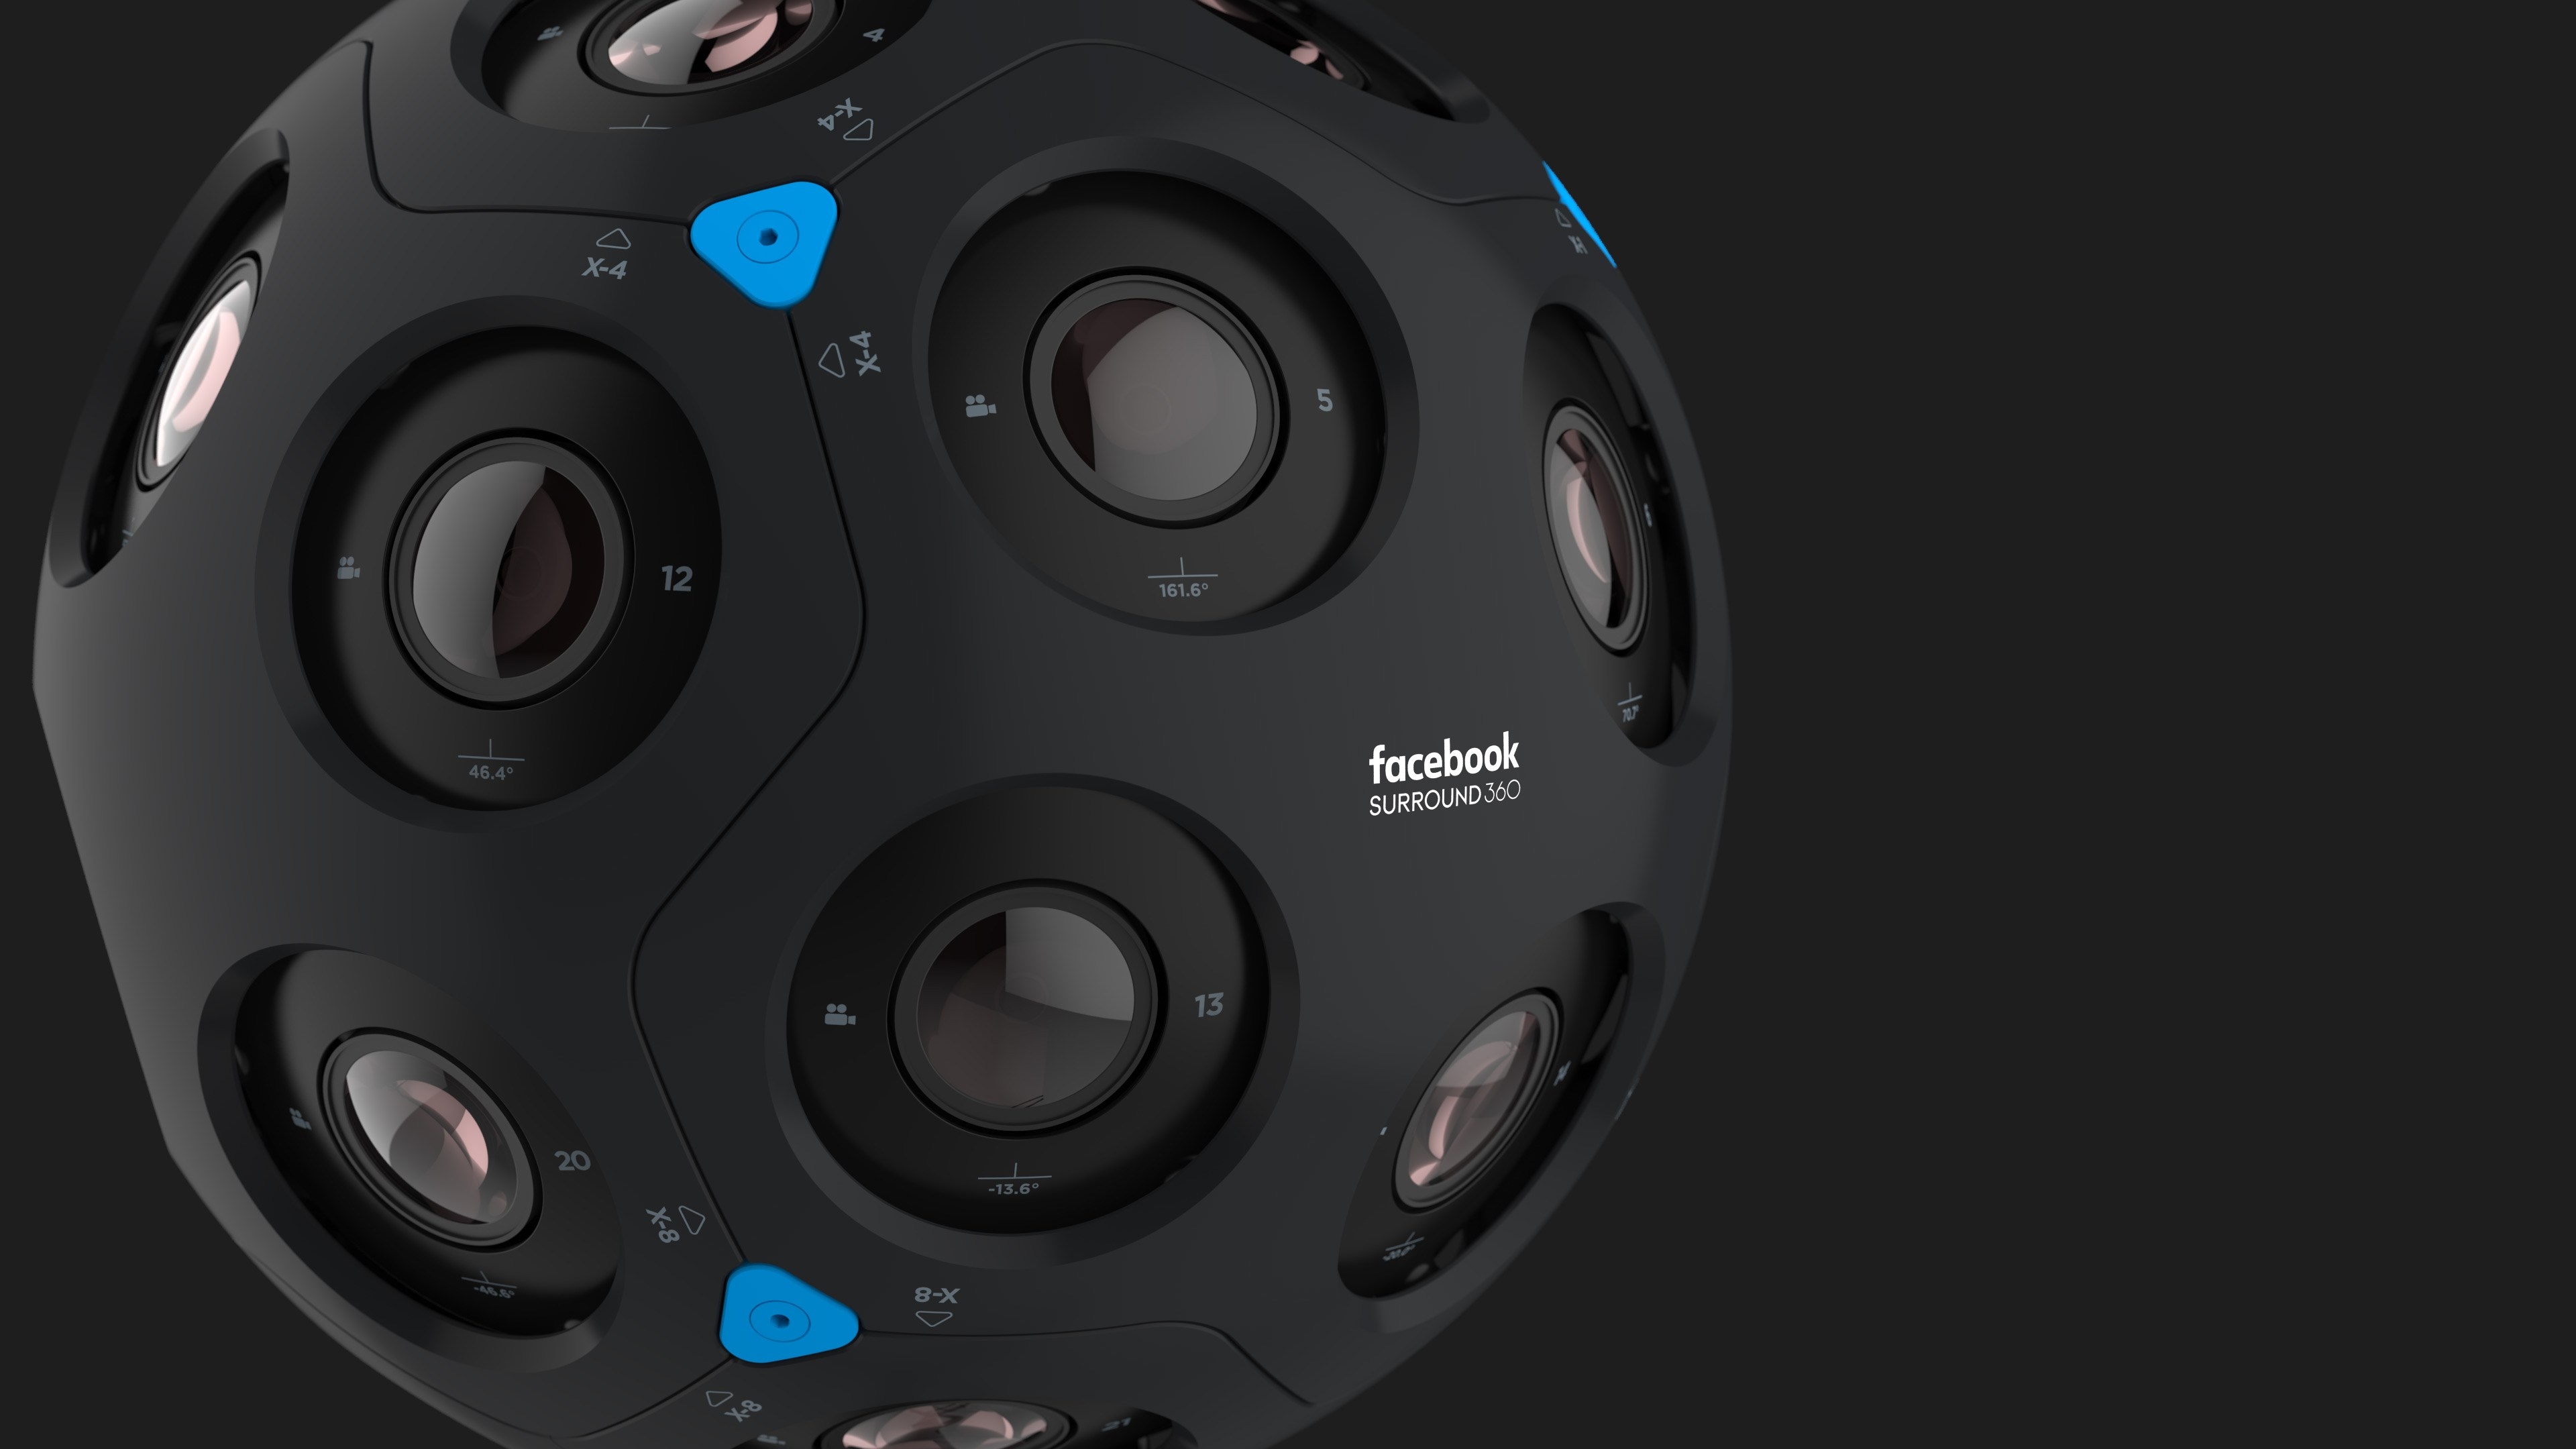 Facebook: F8, Newly Designed 'Surround 360' Camera that Delivers 6 Degrees of Freedom. 3840x2160 4K Background.